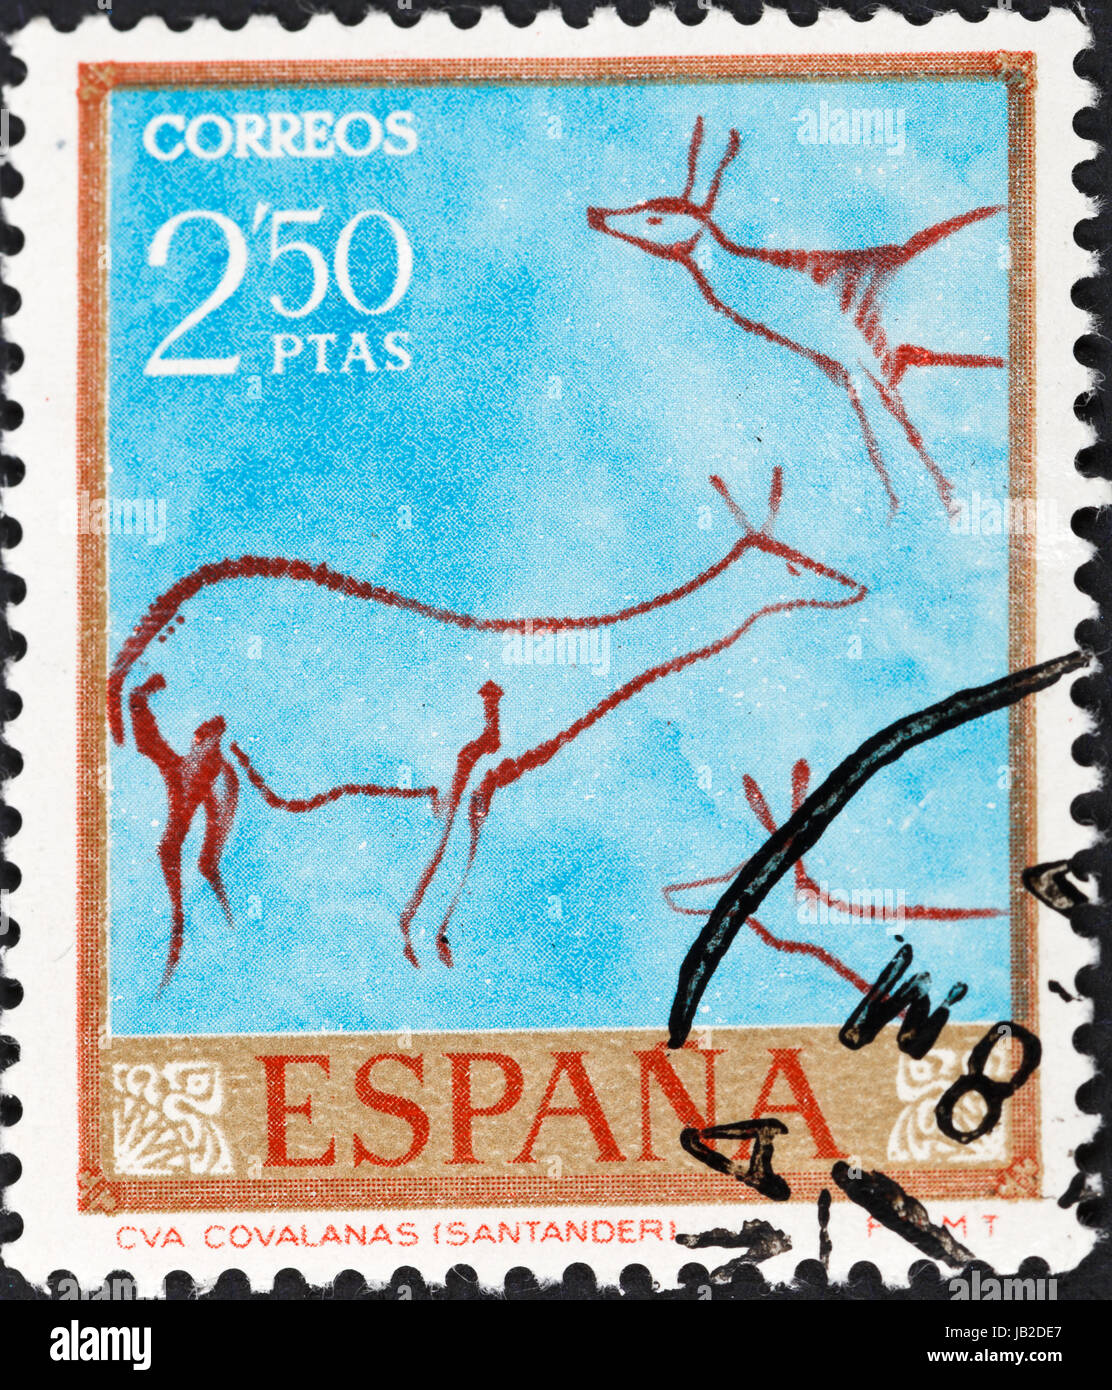 SPAIN - CIRCA 1967: A postage stamp printed in the Spain rock paintings in the Covalanas caves of Spain , circa 1967 Stock Photo